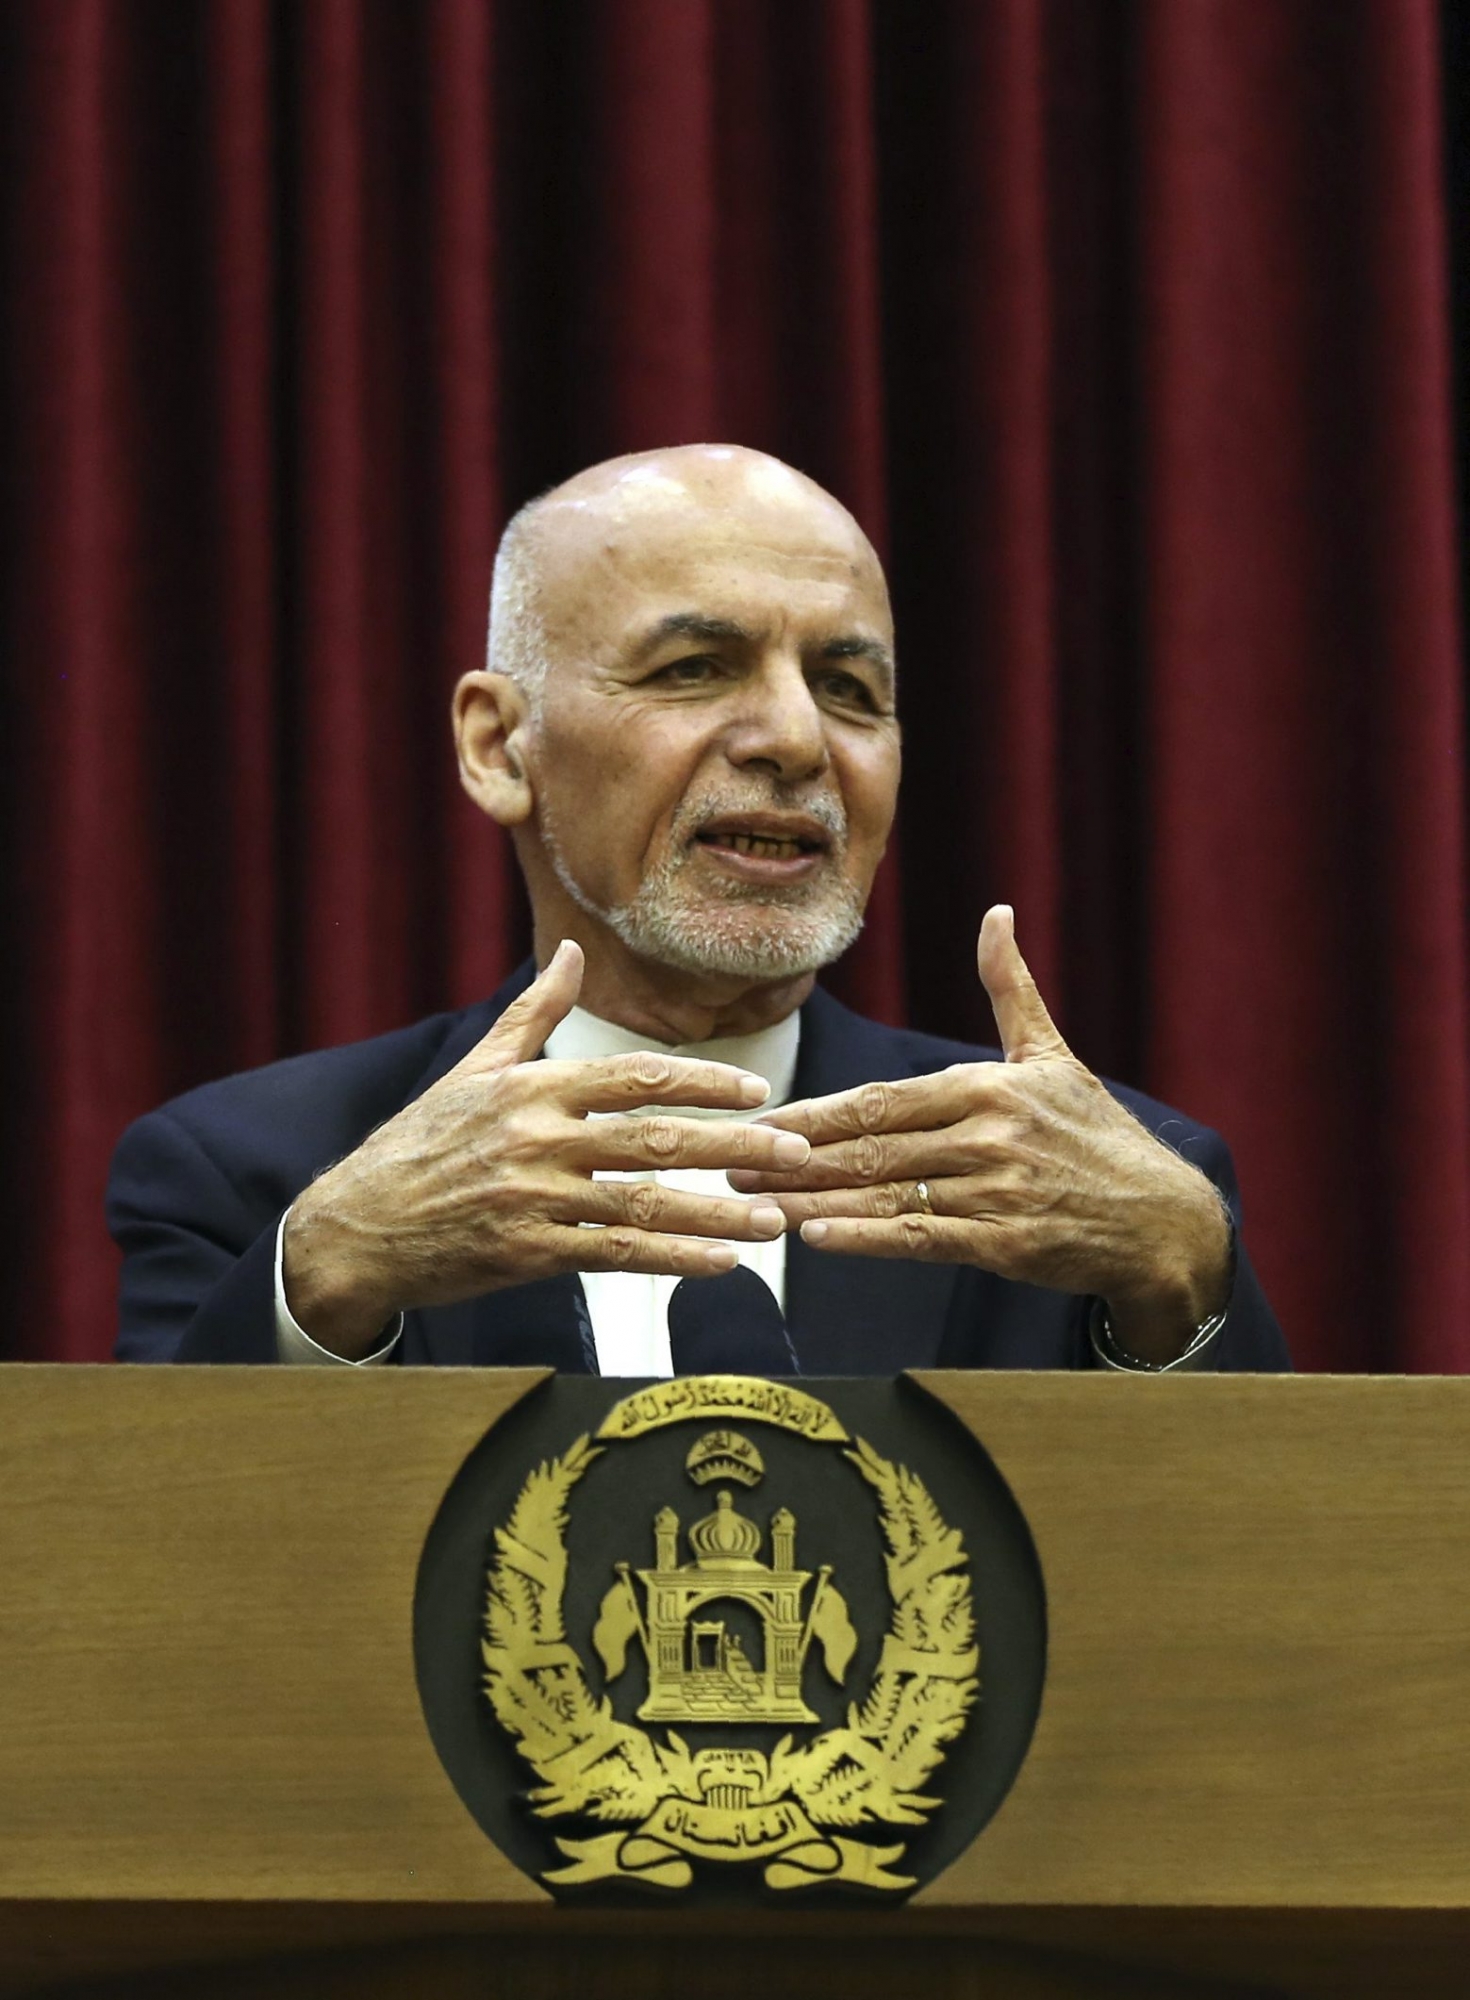 Afghan President Ashraf Ghani speaks during a news conference in presidential palace in Kabul, Afghanistan, Sunday, March, 1, 2020. Ghani said Sunday he won't be releasing the 5,000 prisoners the Taliban say must be freed before intra-Afghan negotiations can begin. (AP Photo/Rahmat Gul)
Ashraf Ghani Afghanistan Peace Deal